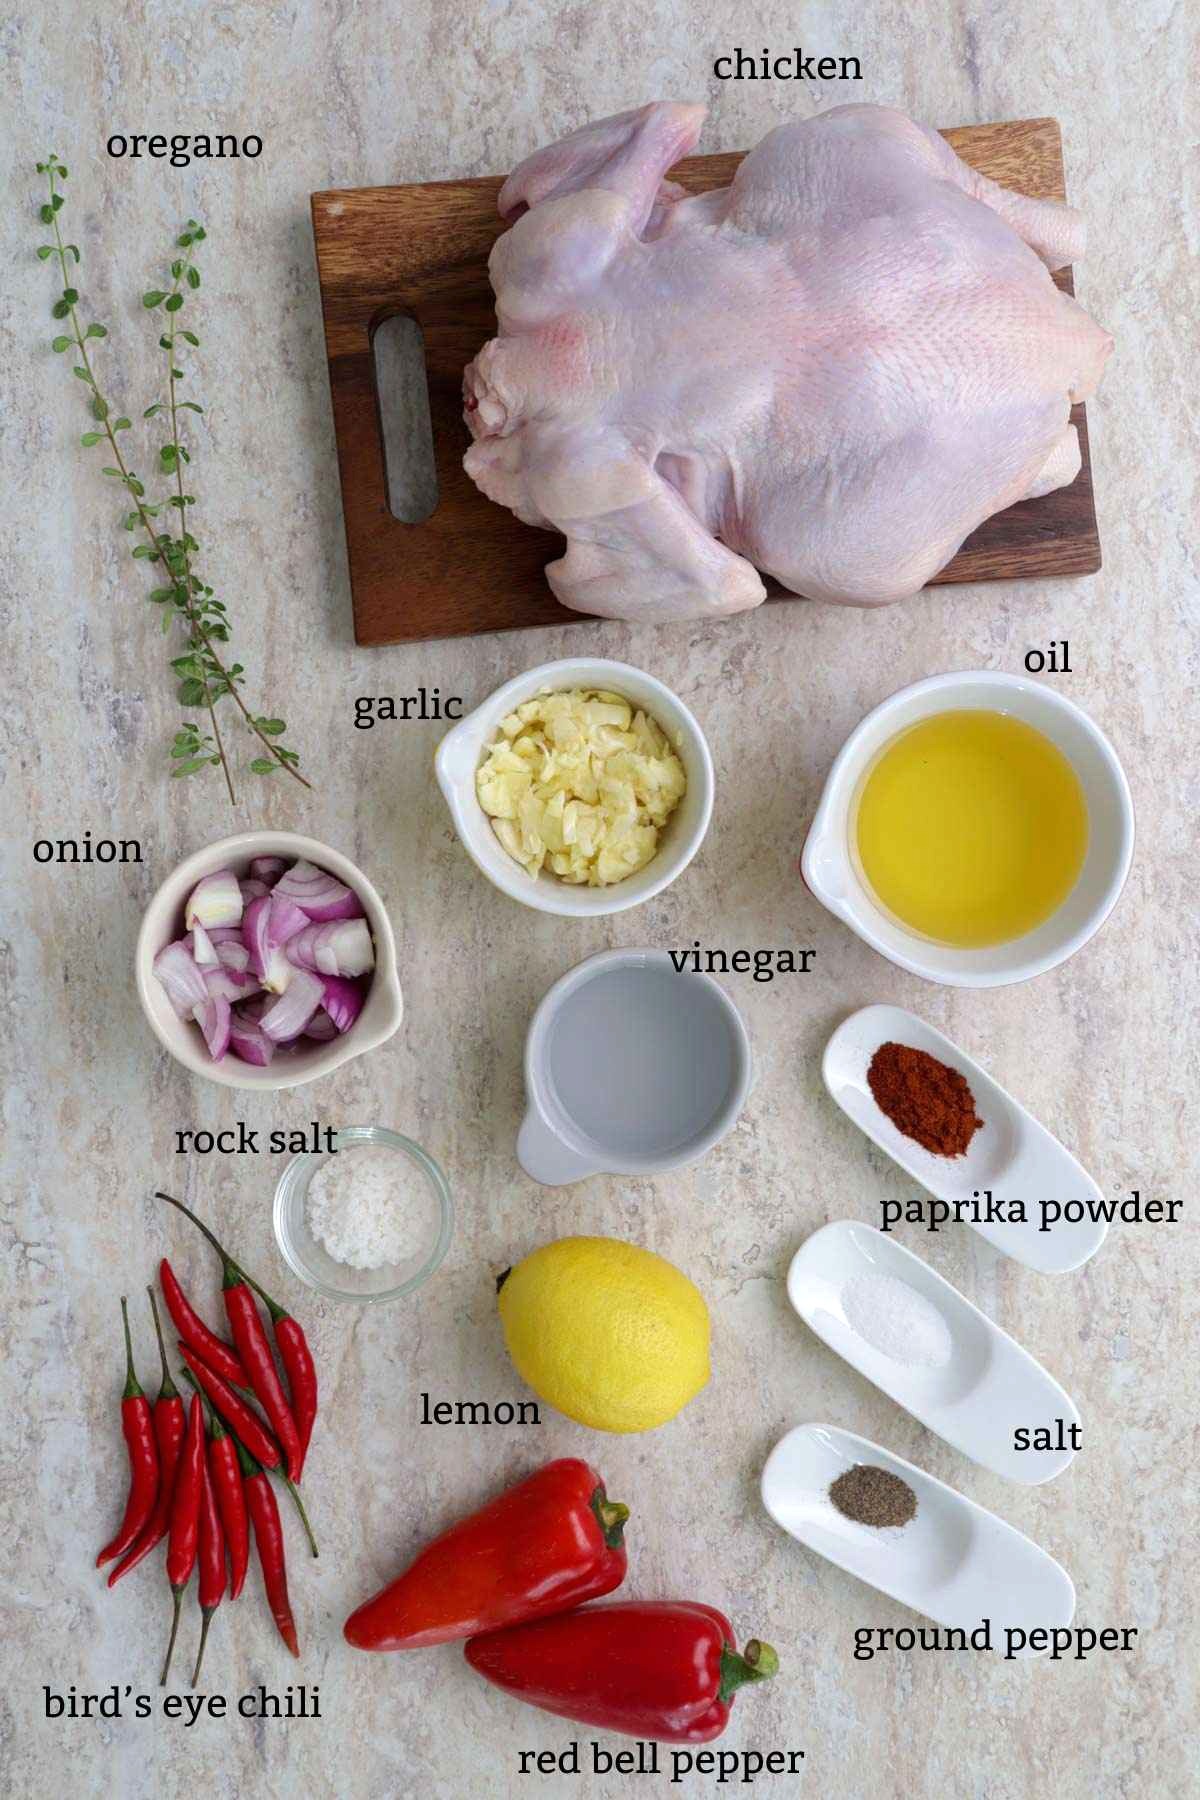 Ingredients needed for Peri peri chicken.